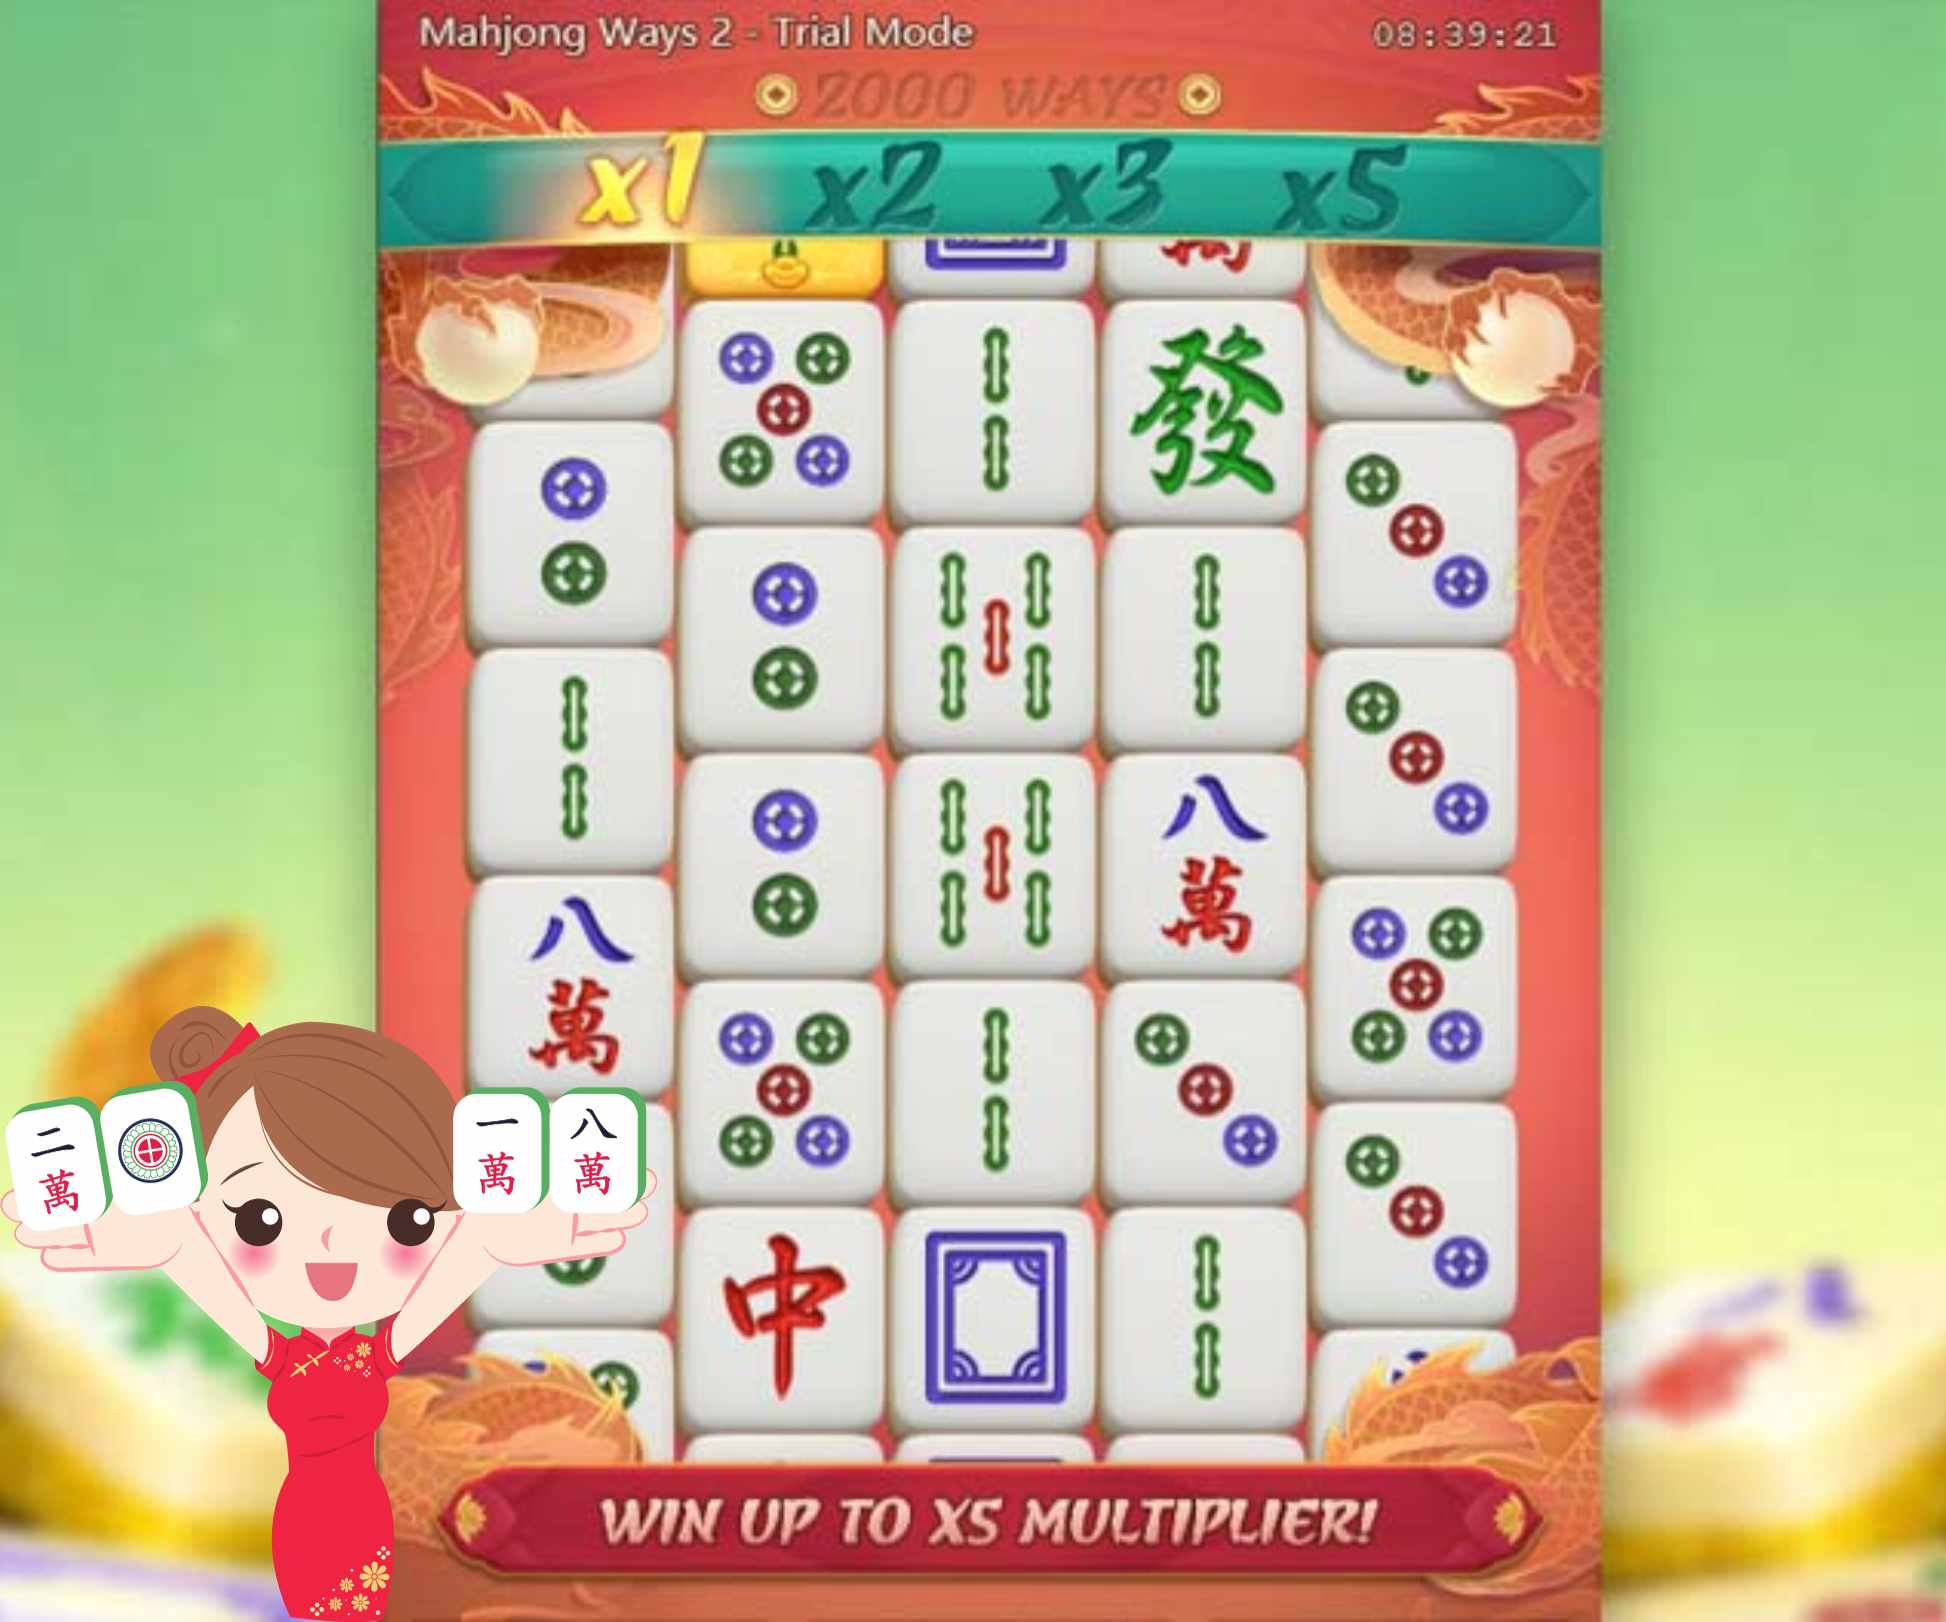 Mahjong slot the best popular site for playing mahjong in Indonesia